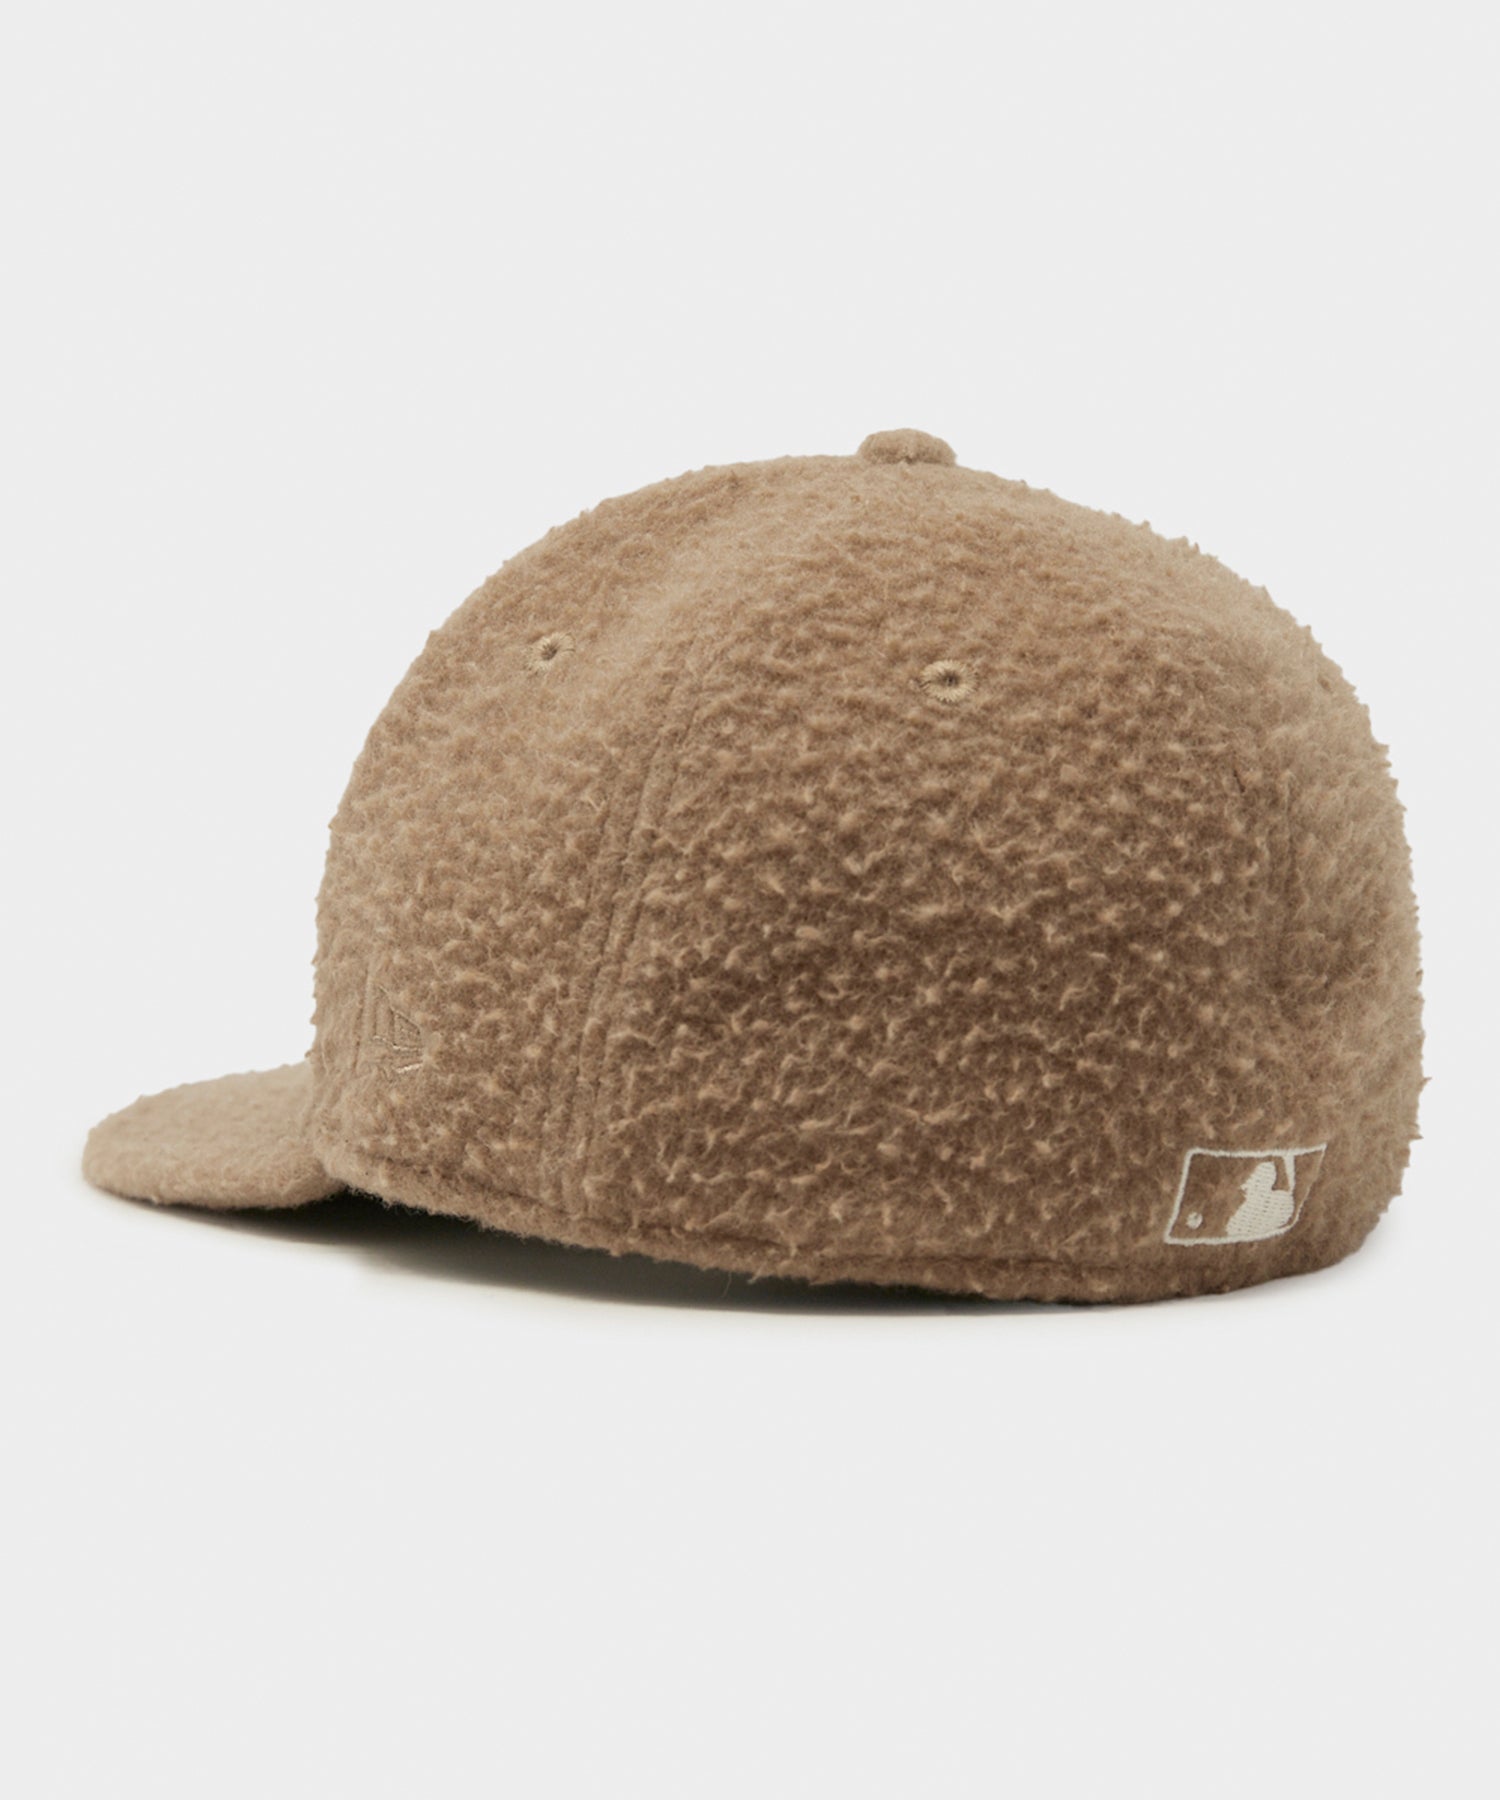 New York Yankees TEAM-FLOCKING Brown-Wheat Fitted Hat